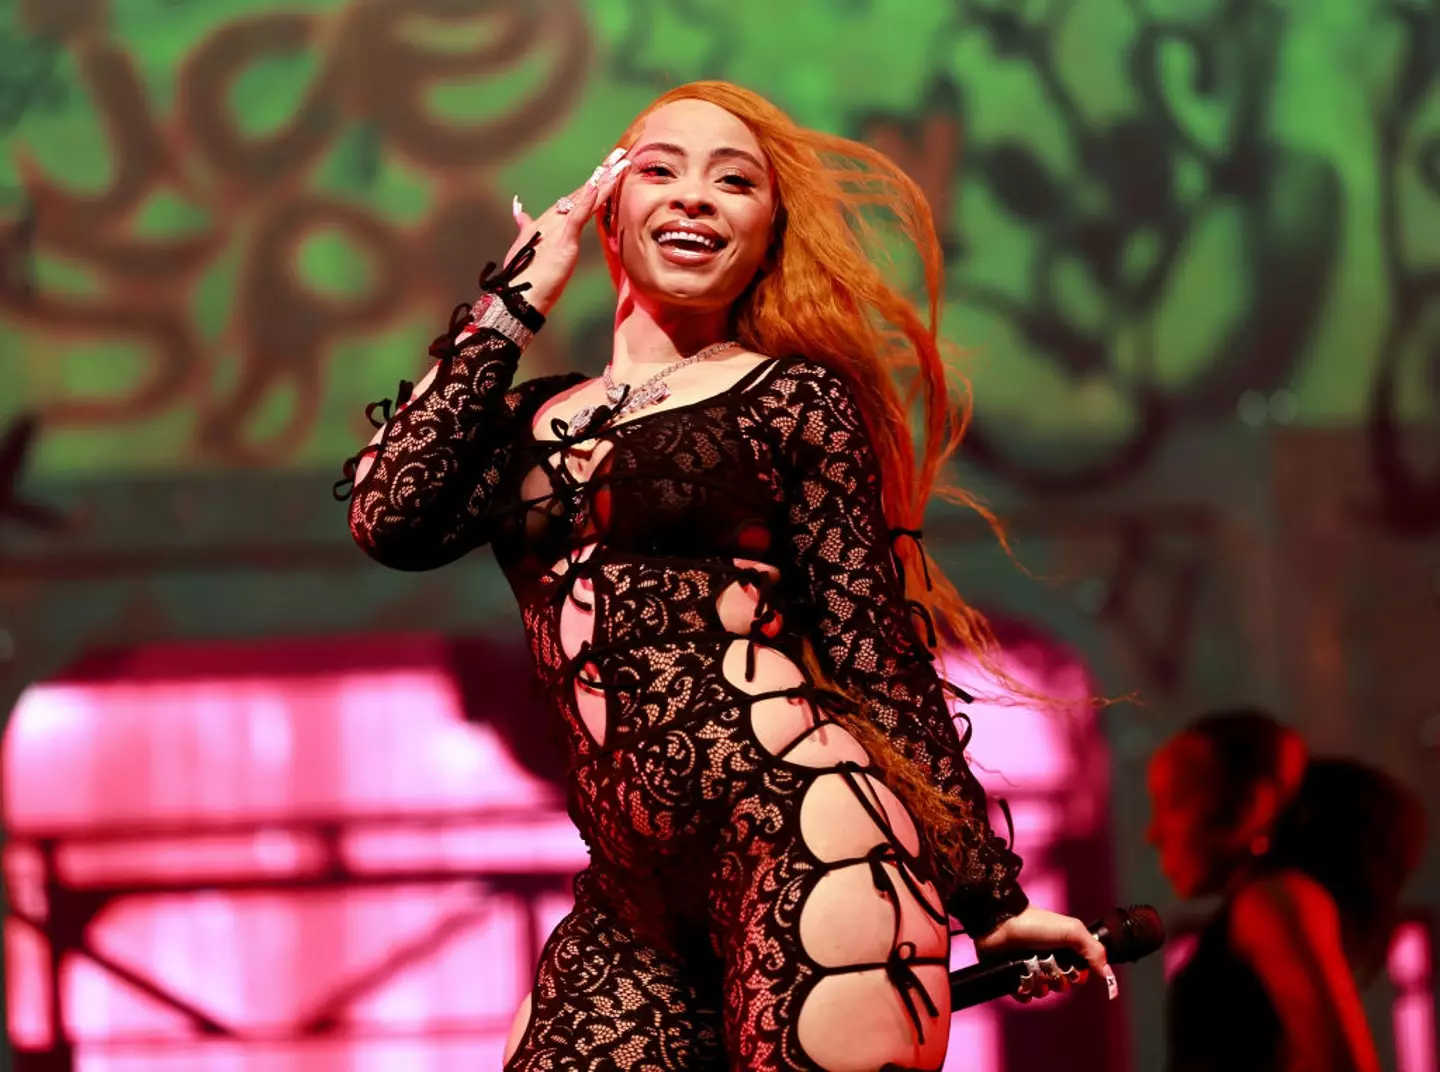 Ice Spice performed at Coachella this weekend. (Matt Winkelmeyer/Getty Images for Coachella)